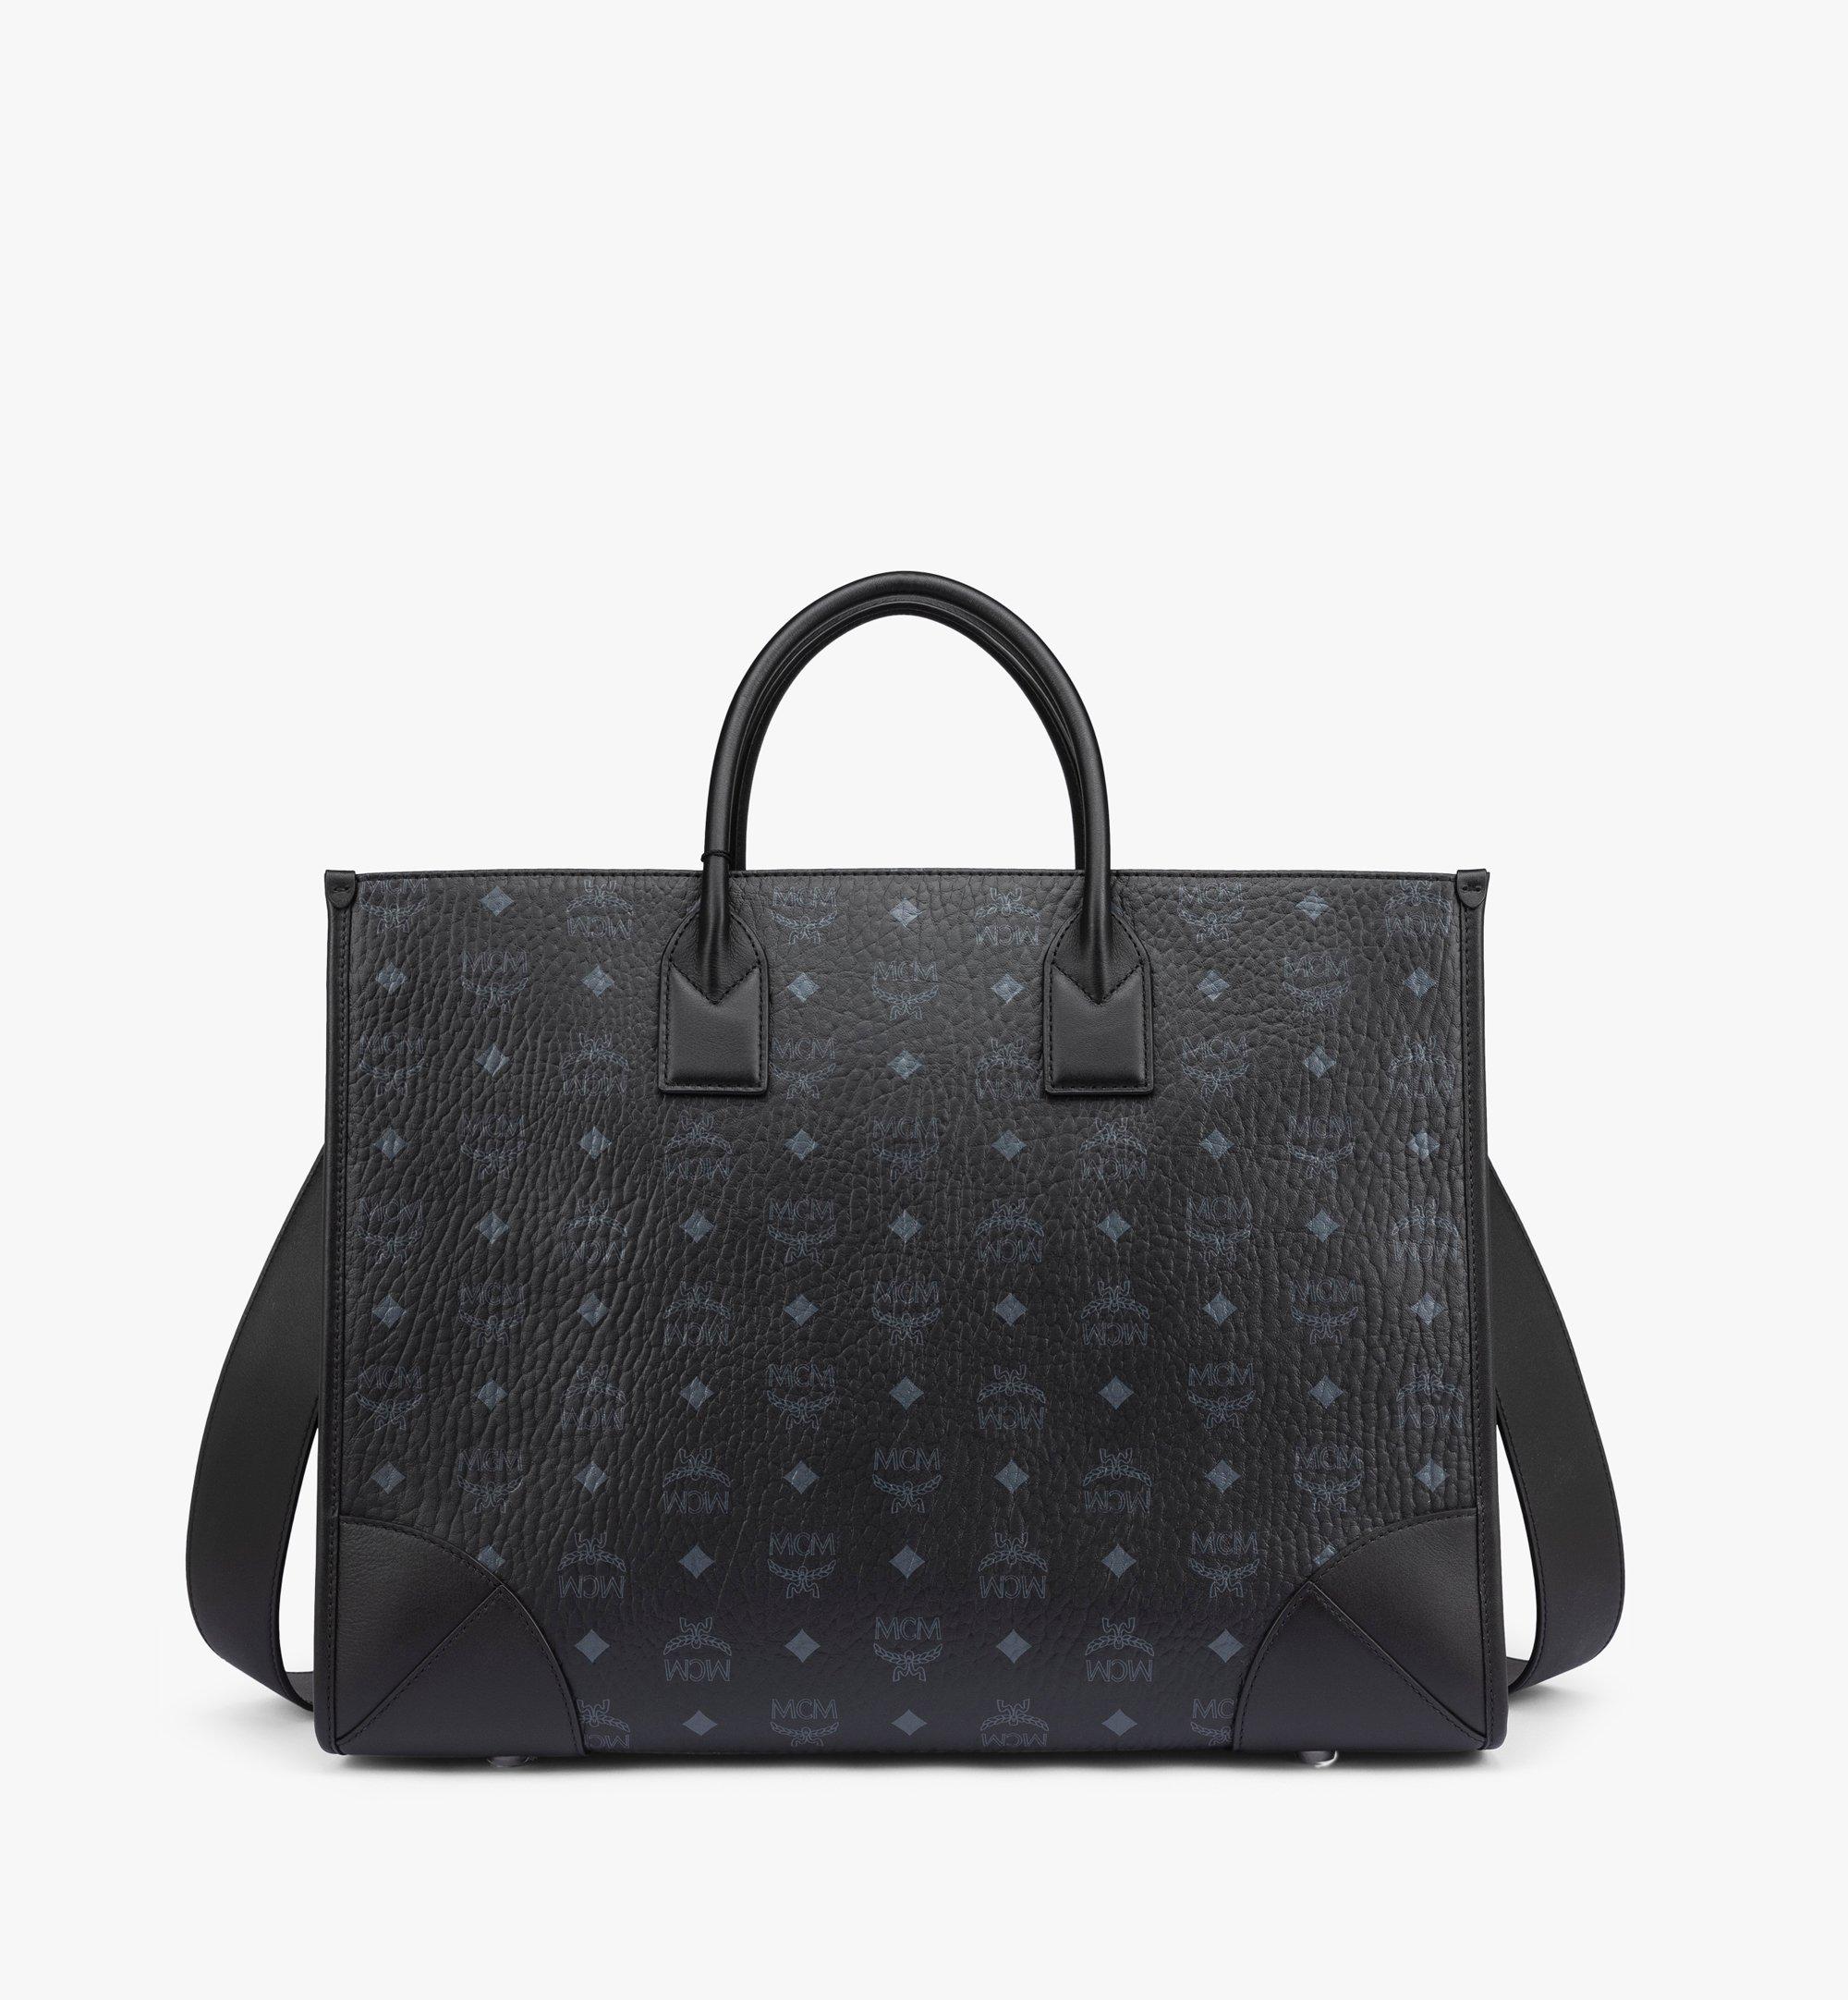 Shop MCM Tote Bags for Men - SS18 Online - Quick Shipping to Latvia.